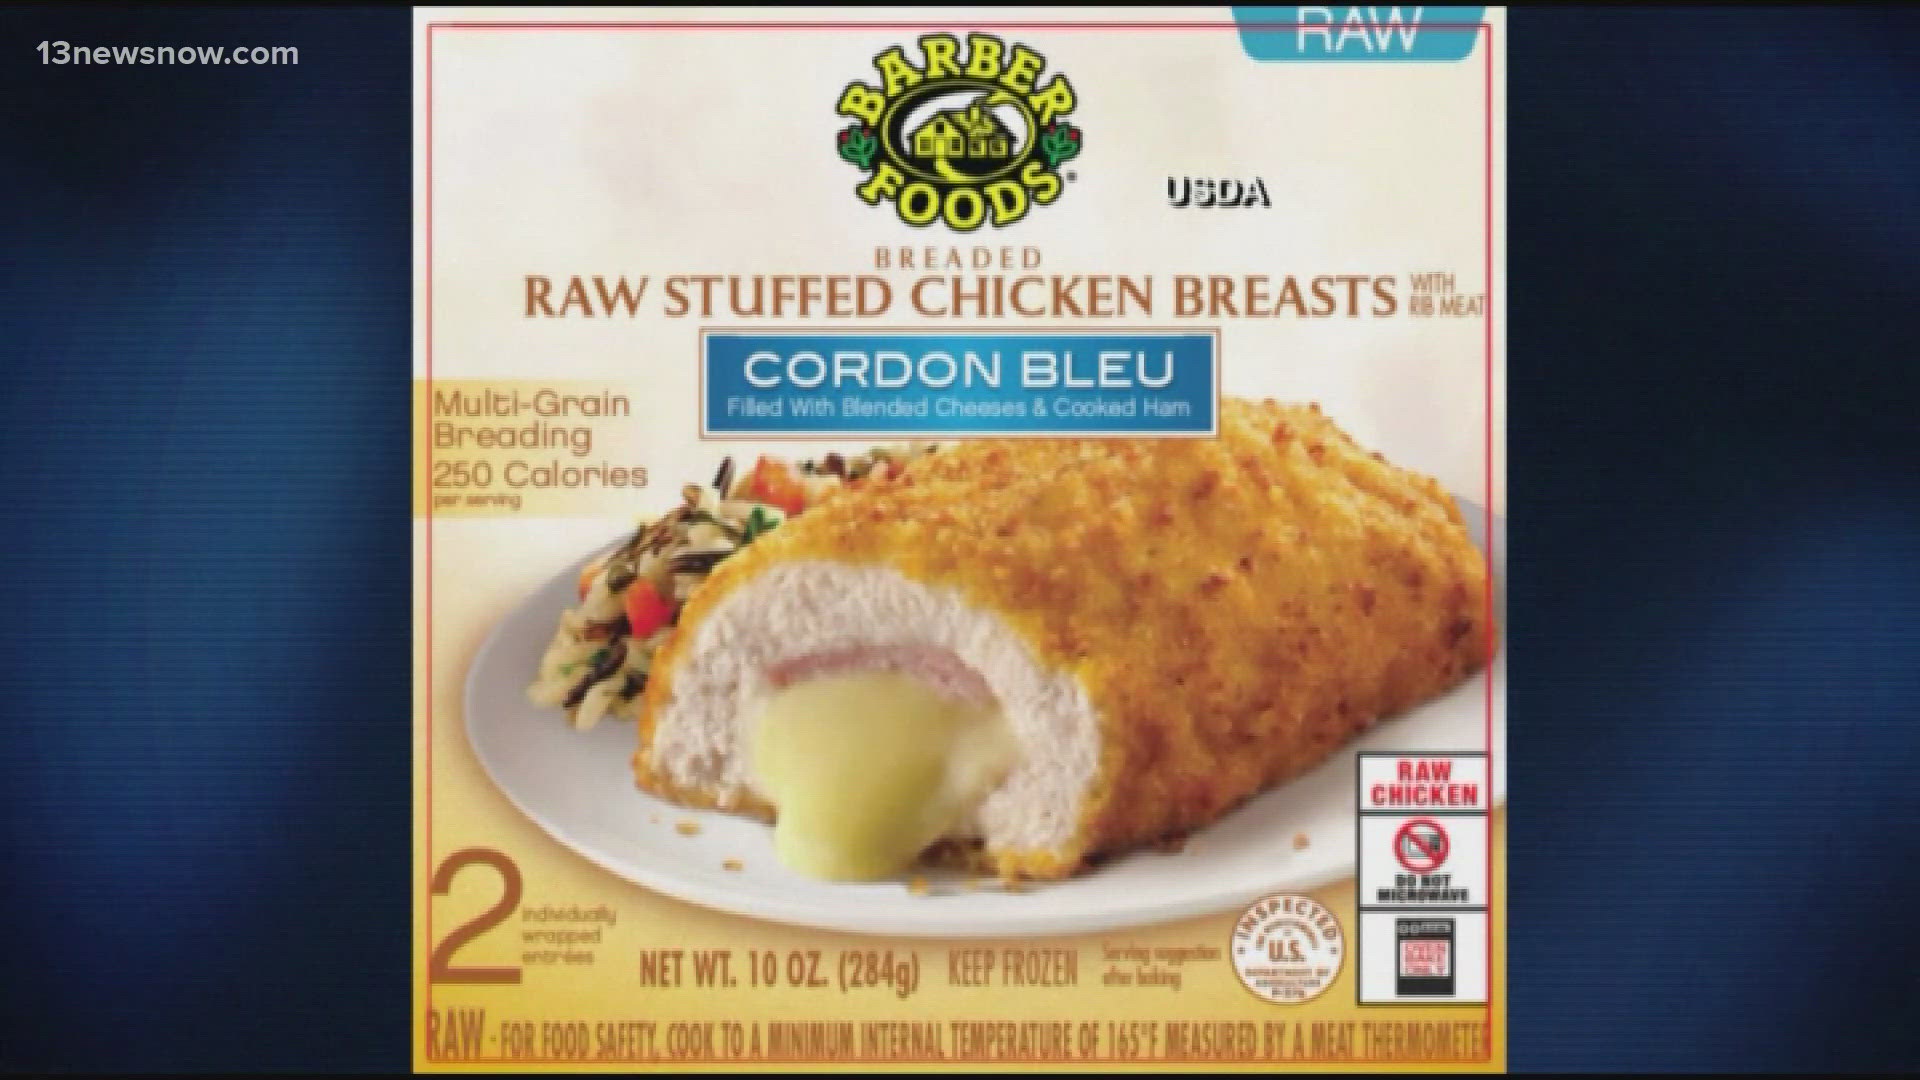 US Agriculture officials have finalized a rule regulating salmonella in raw breaded chicken products.